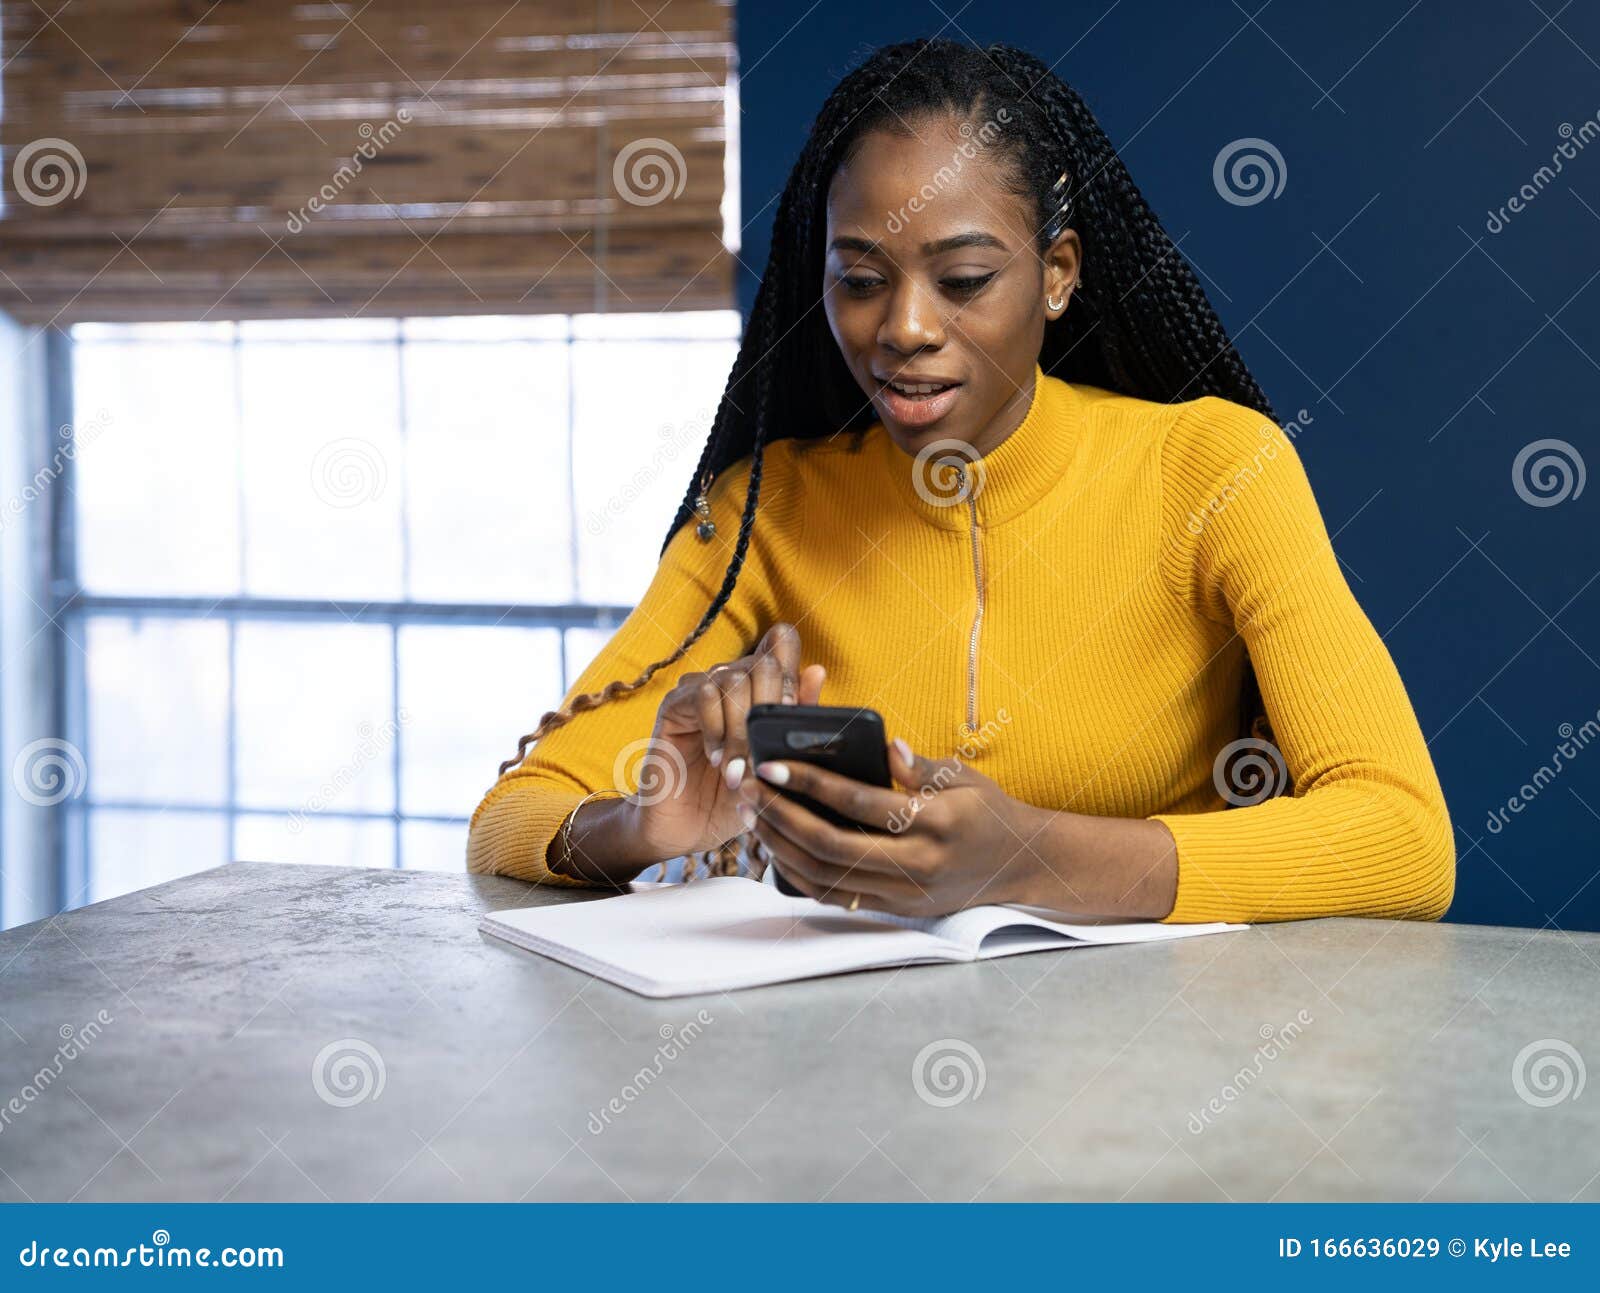 Young African American Woman with Yellow Shirt Sitting at the Kitchen ...